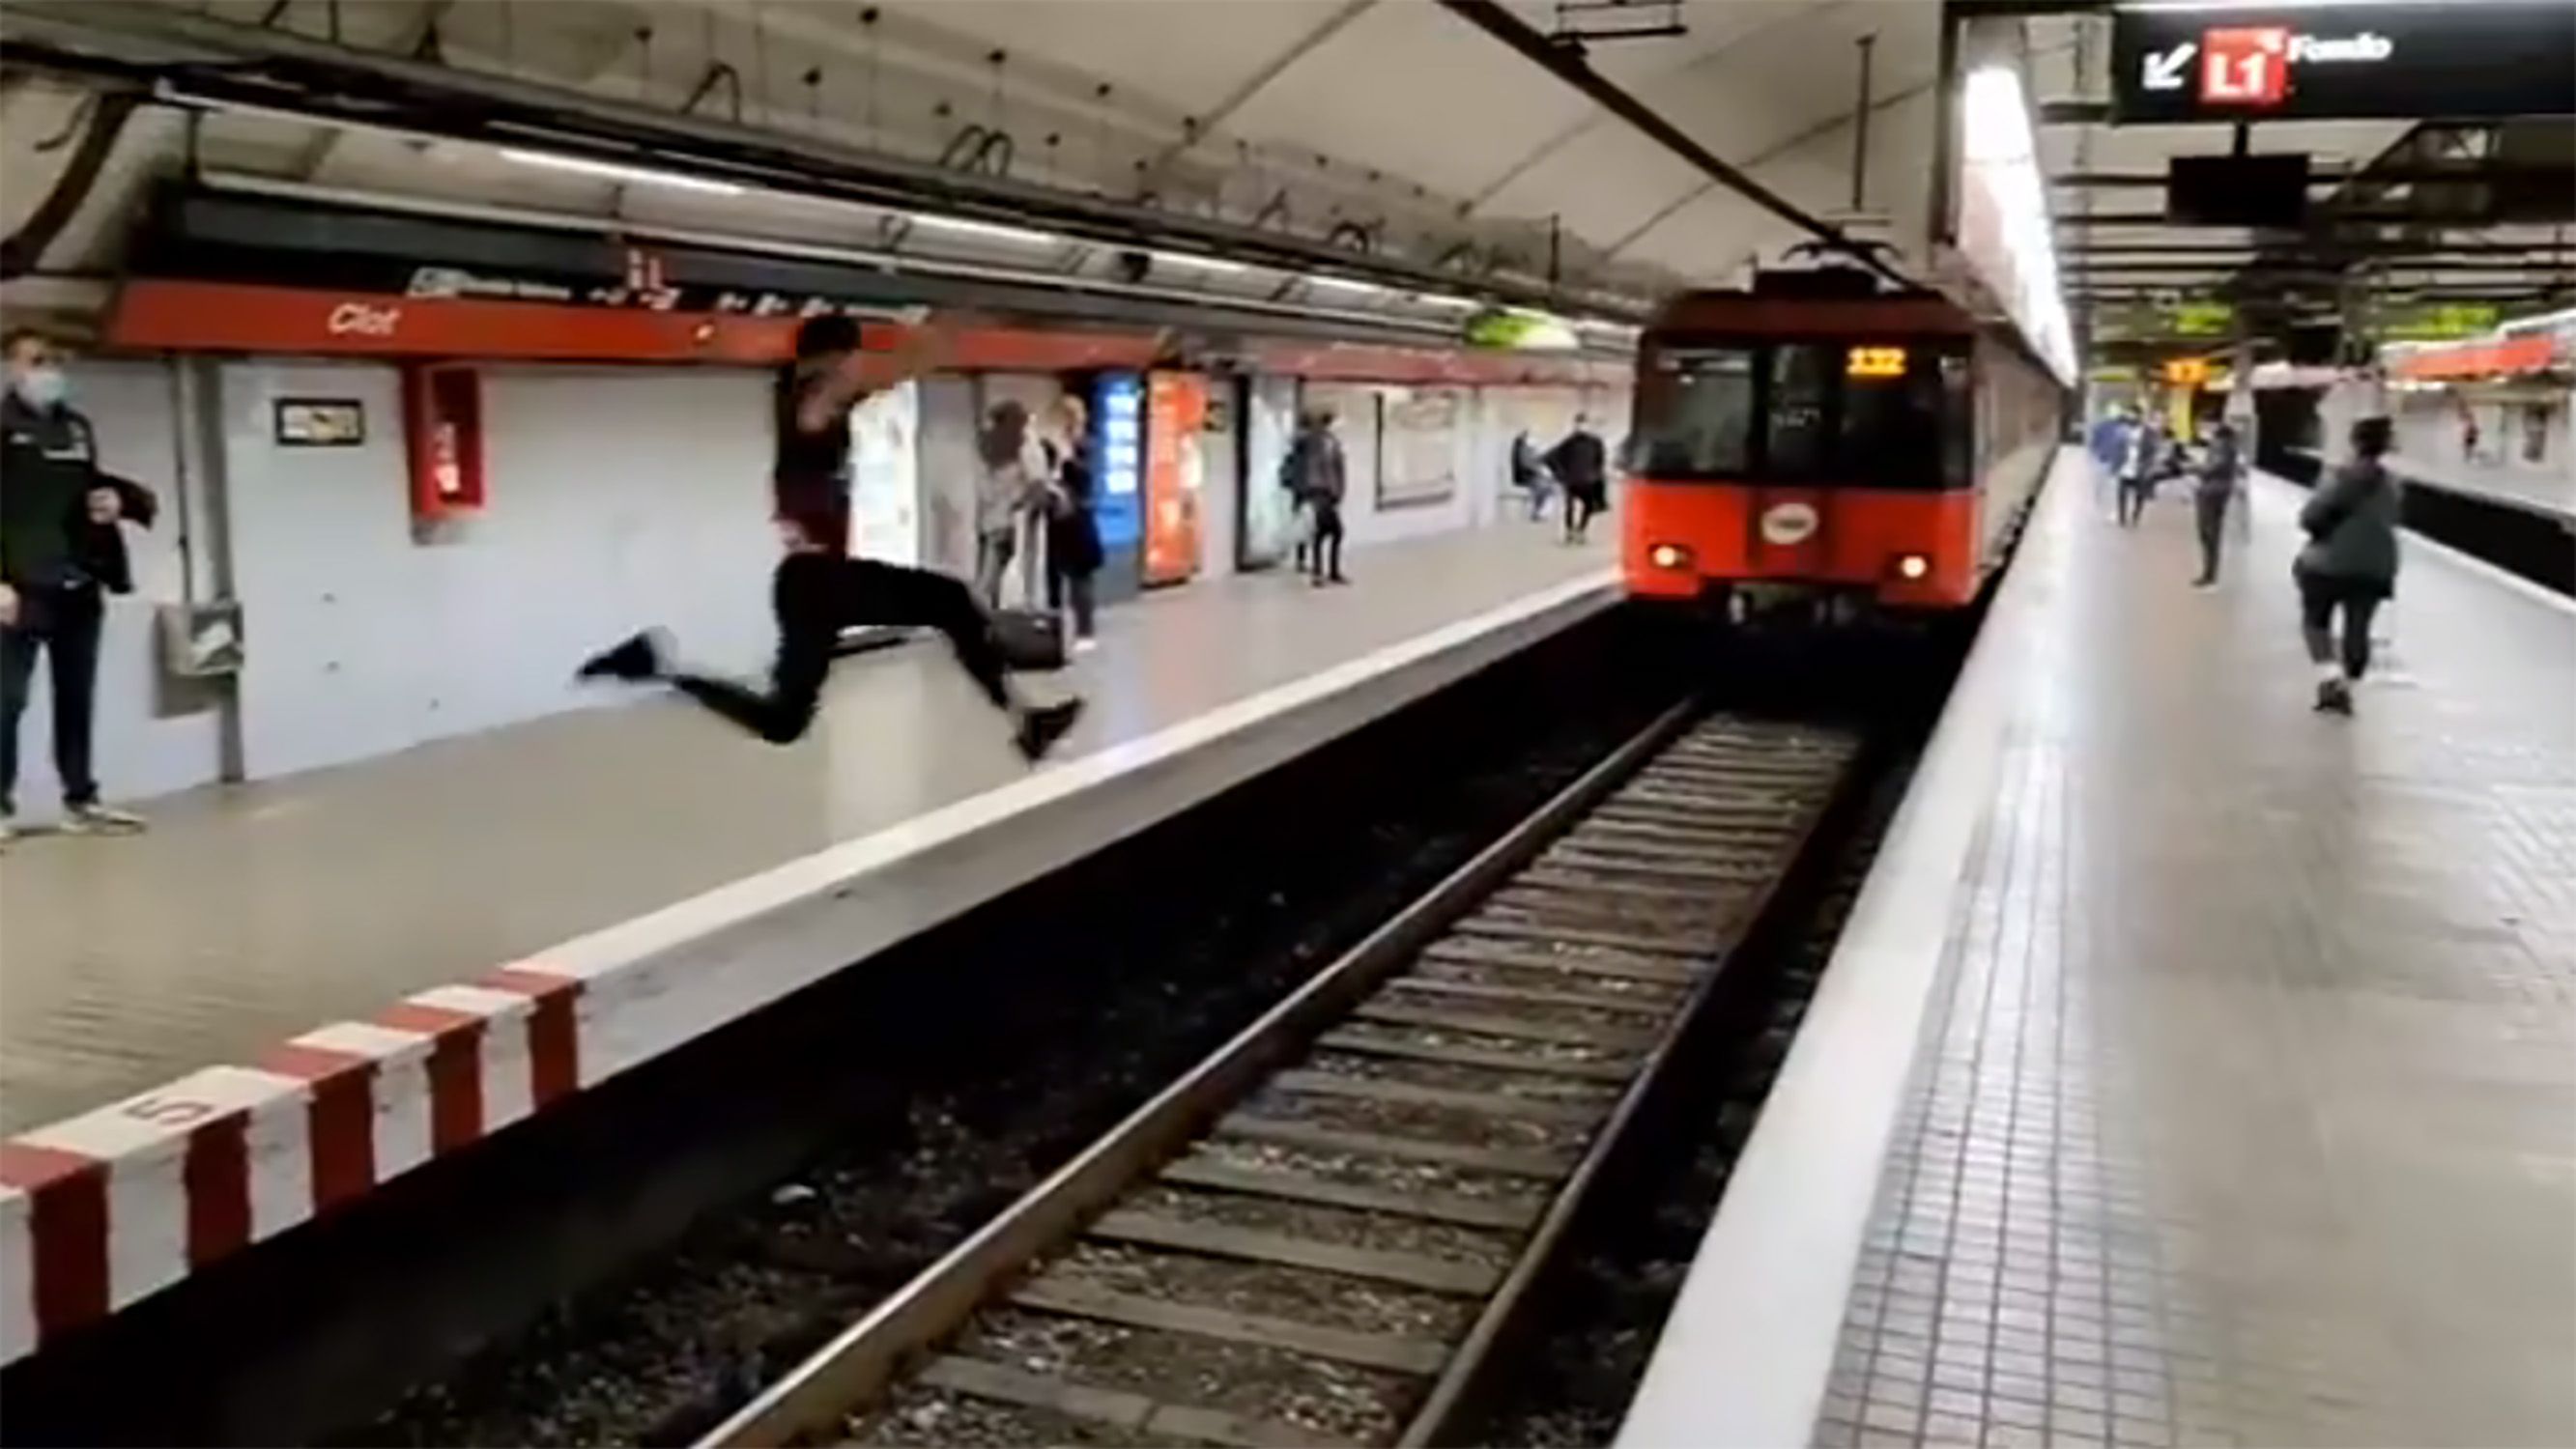 Located and charged: foolhardy Barcelona man who jumped in front of train